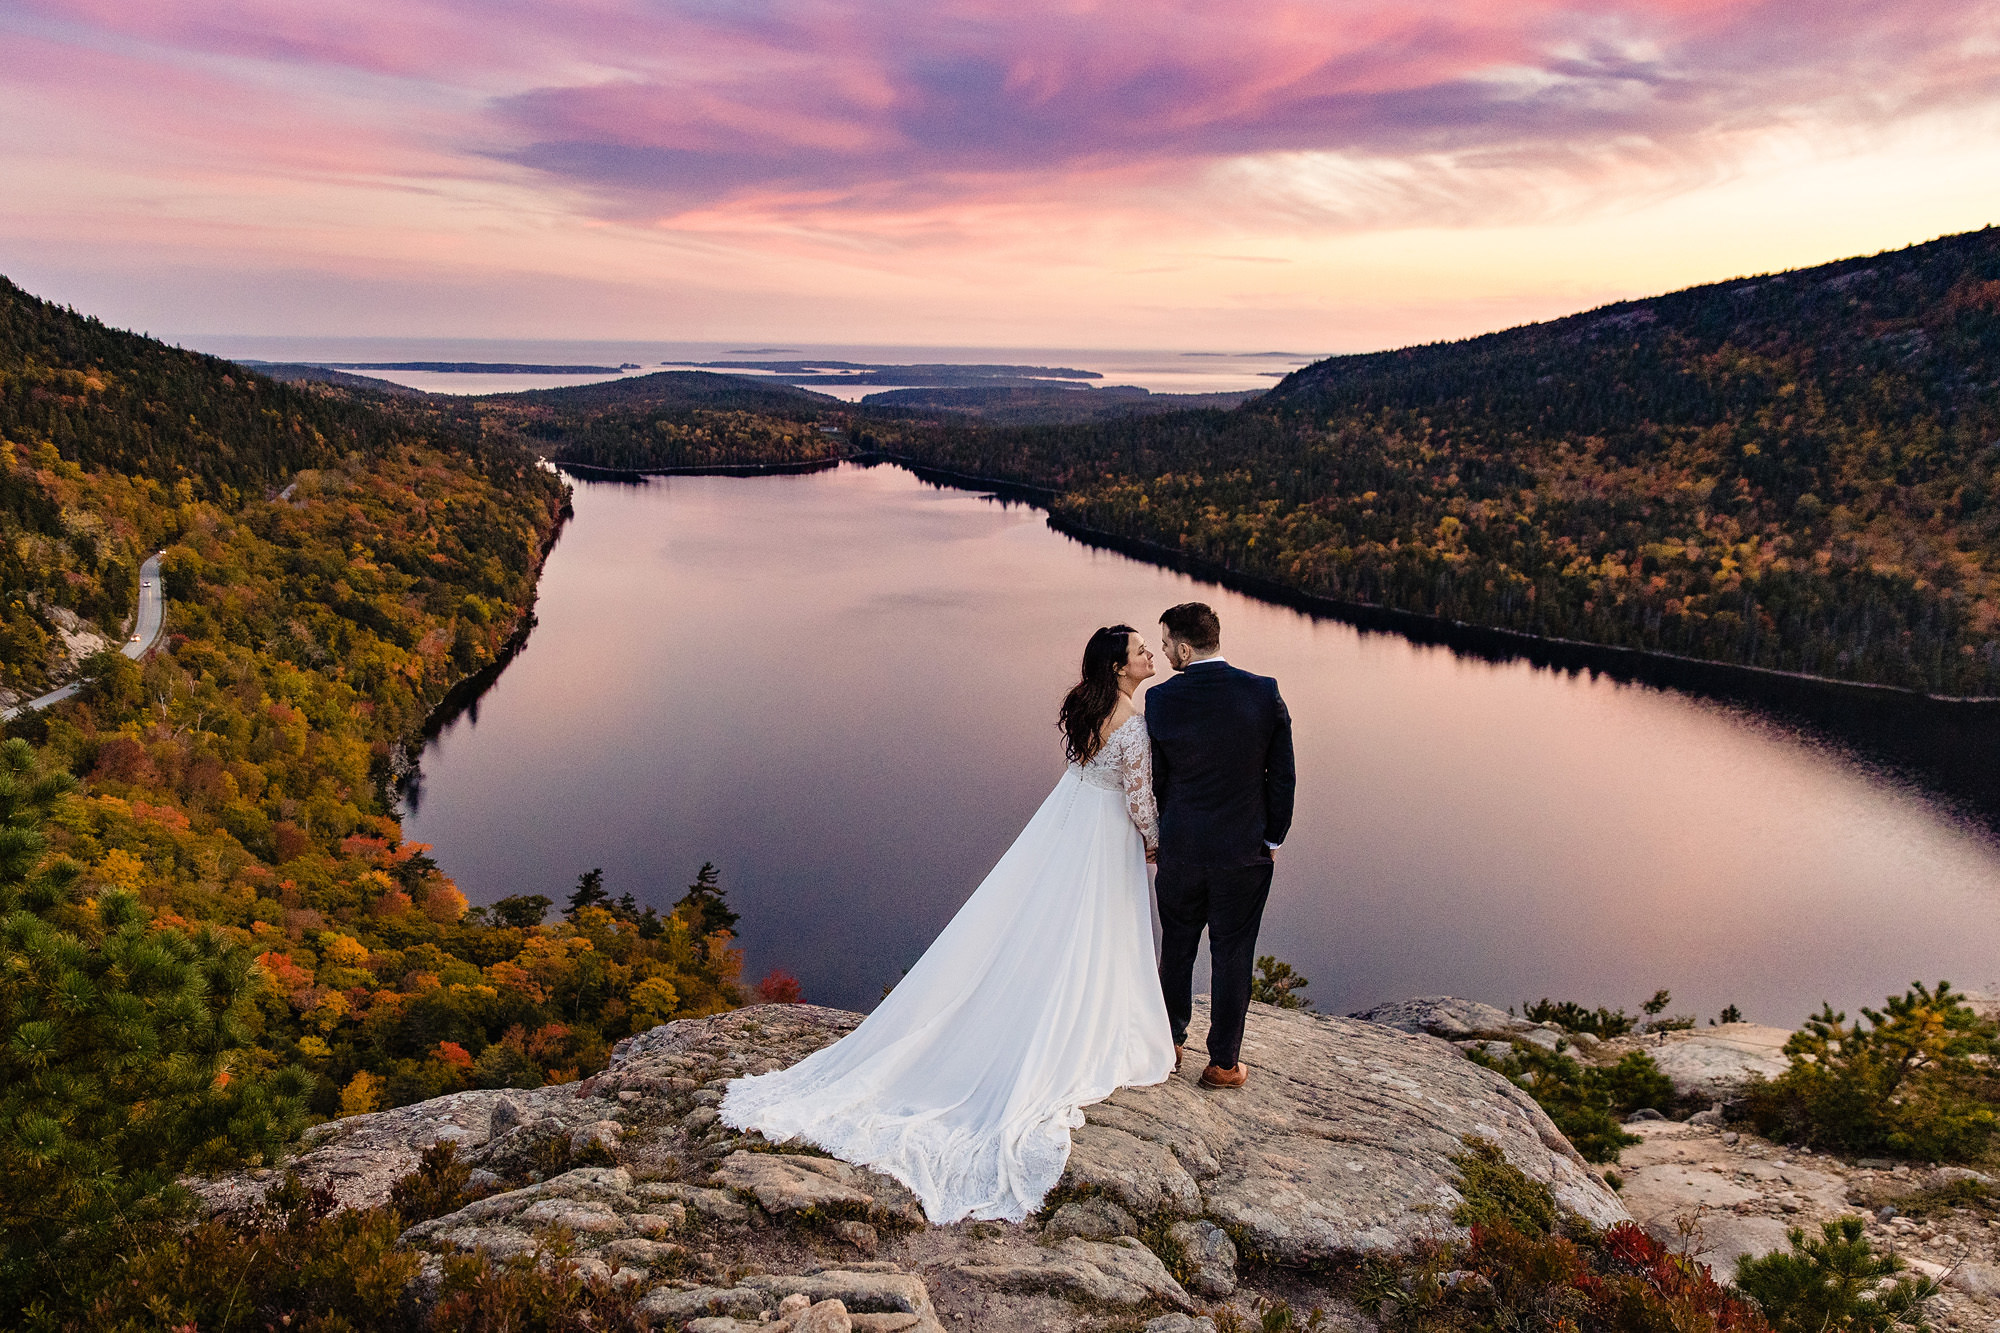 A wedding portrait taken on top of a mountain in Acadia at sunset.